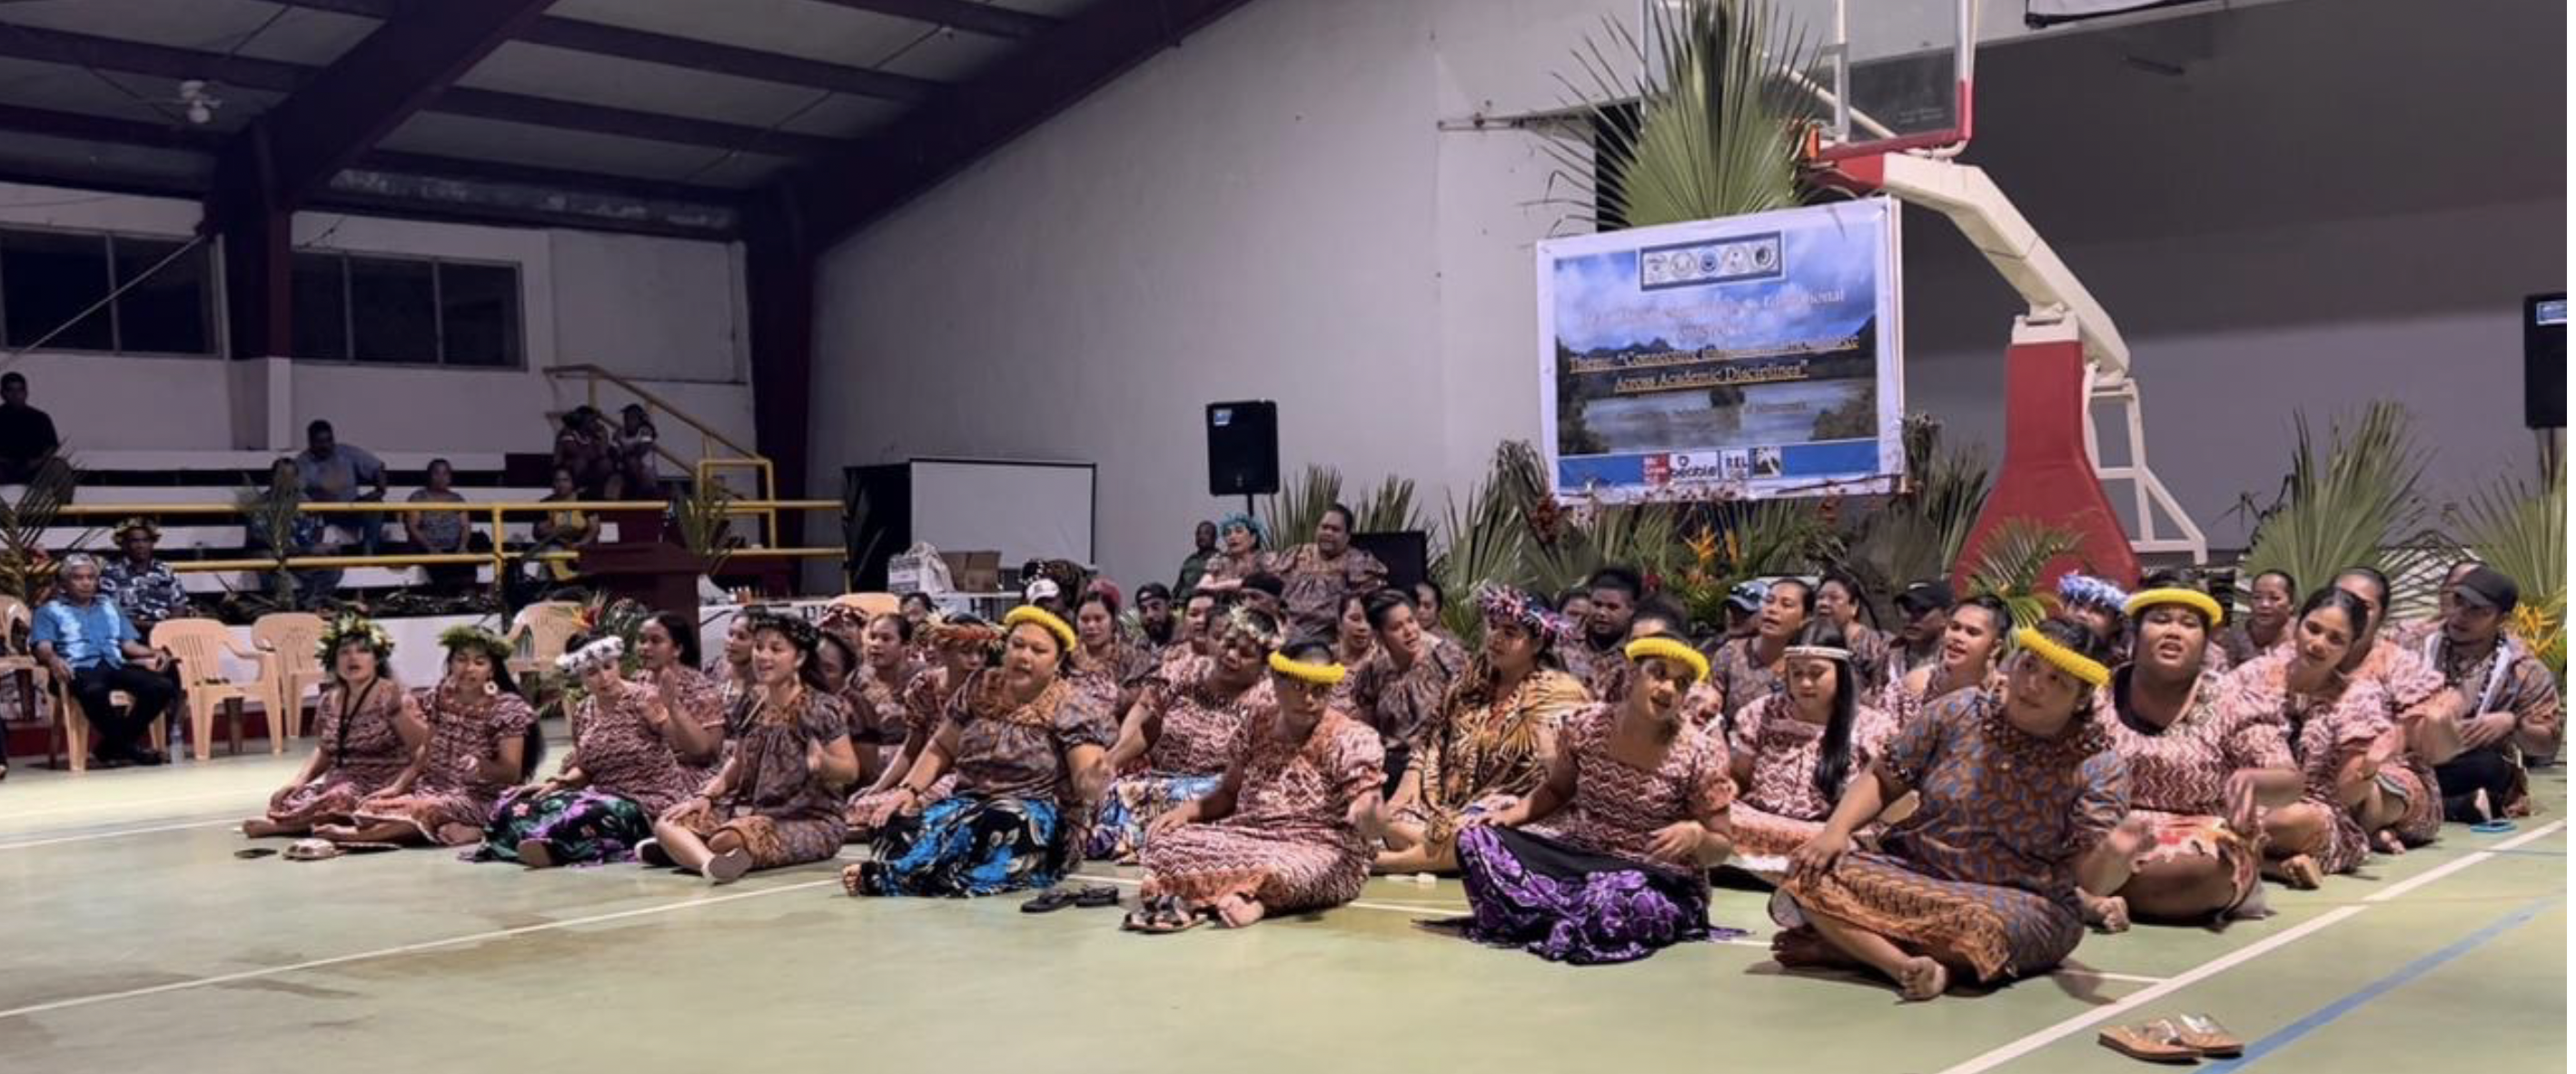 Chuuk State performs several chants for the audience at the closing ceremony of the 2023 MTEC in Kosrae, FSM.